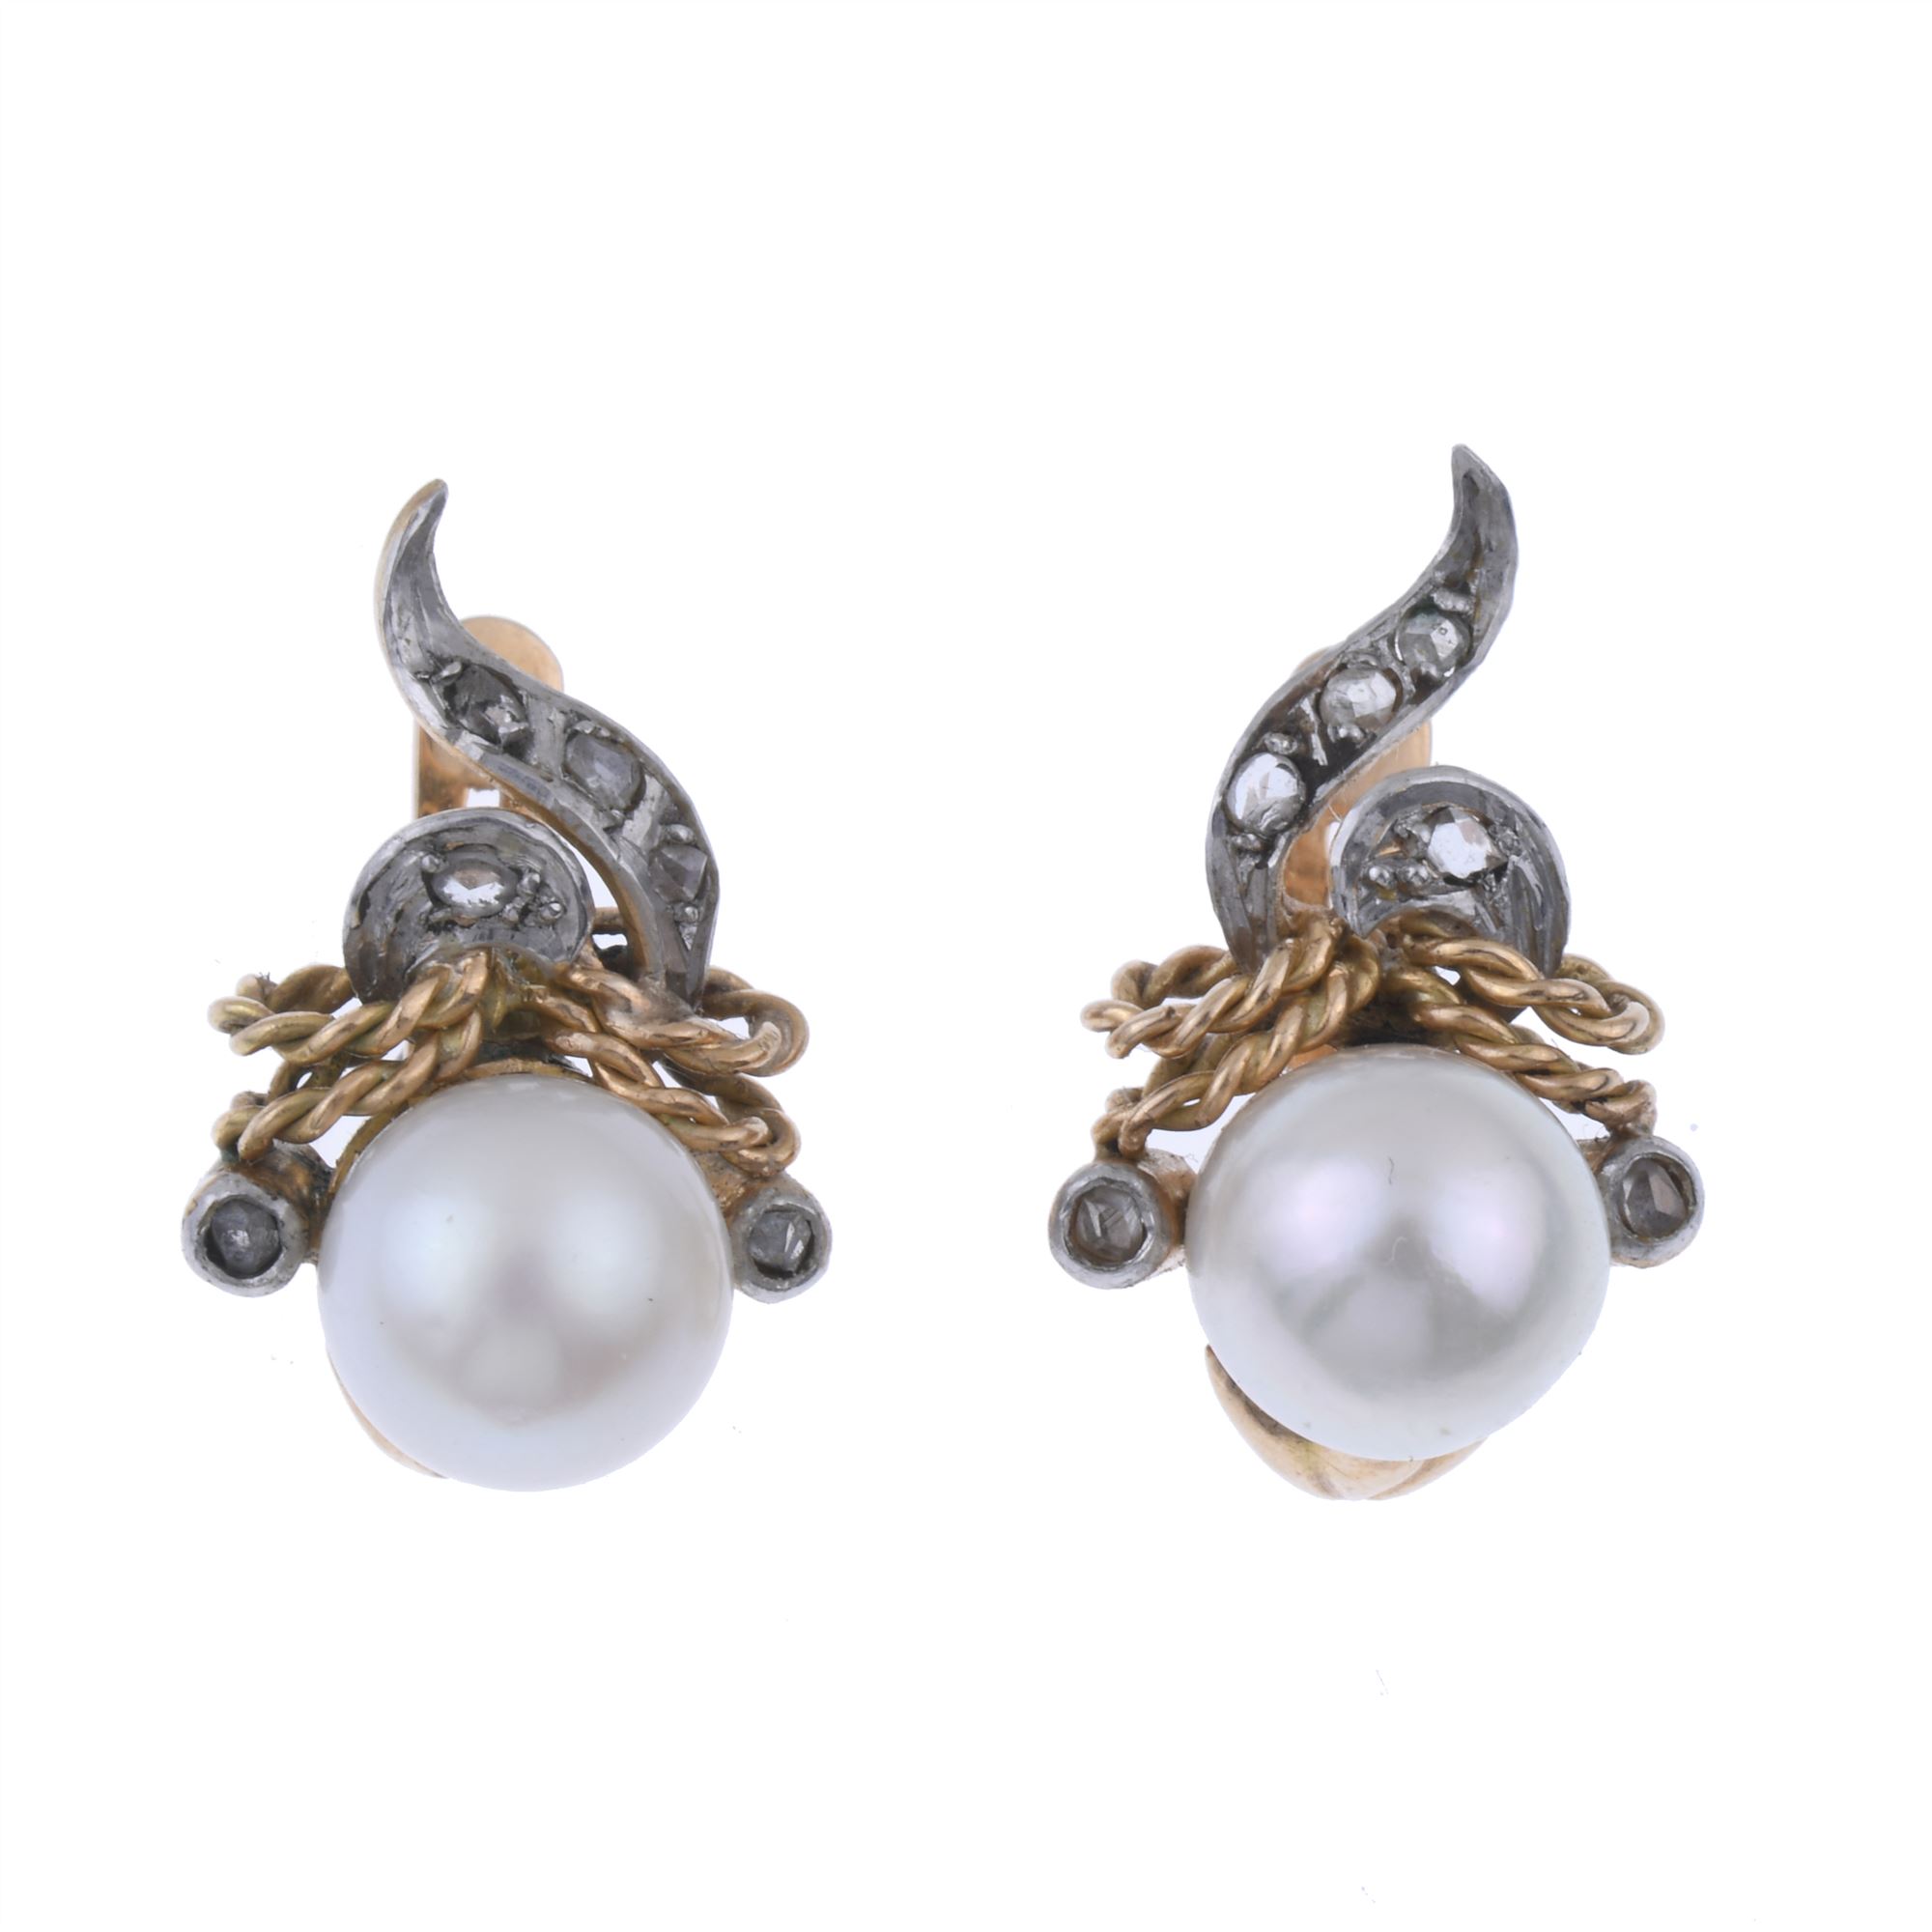 YELLOW GOLD EARRINGS WITH PEARLS.